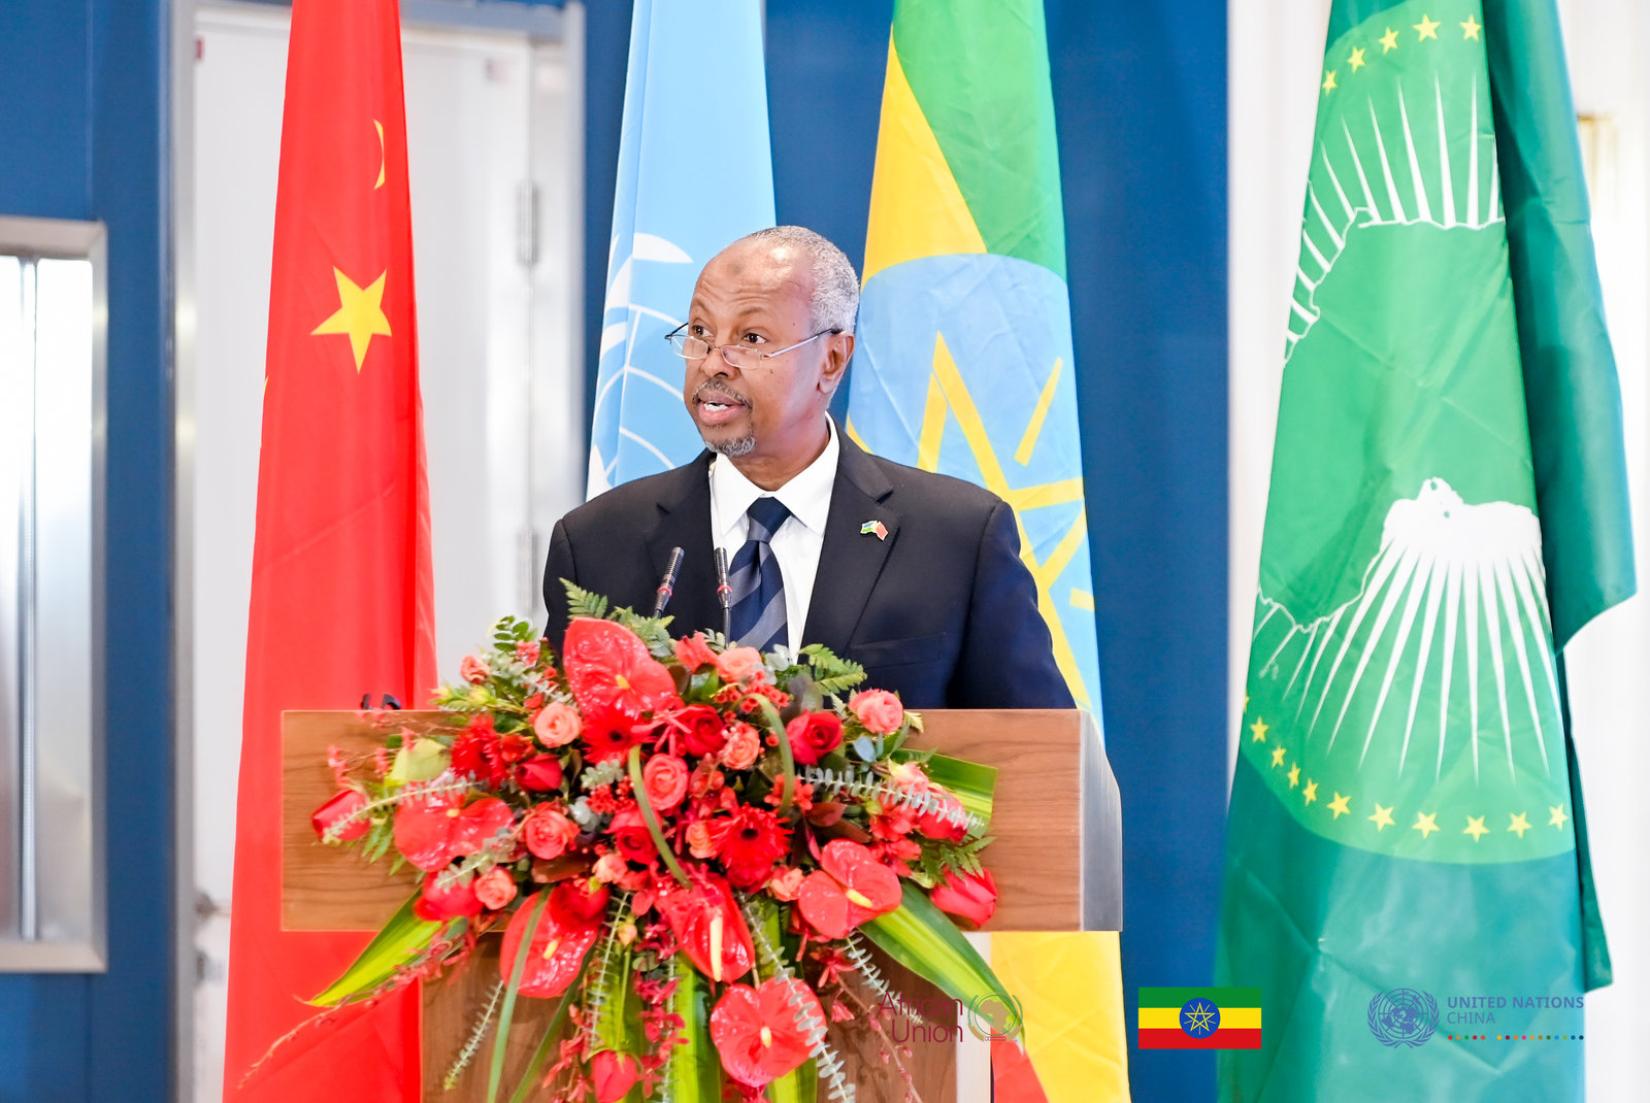 H.E. Mr. Abdallah Abdillahi Miguil, Ambassador of the Republic of Djibouti to the People’s Republic of China, Dean of the African Ambassadors Group